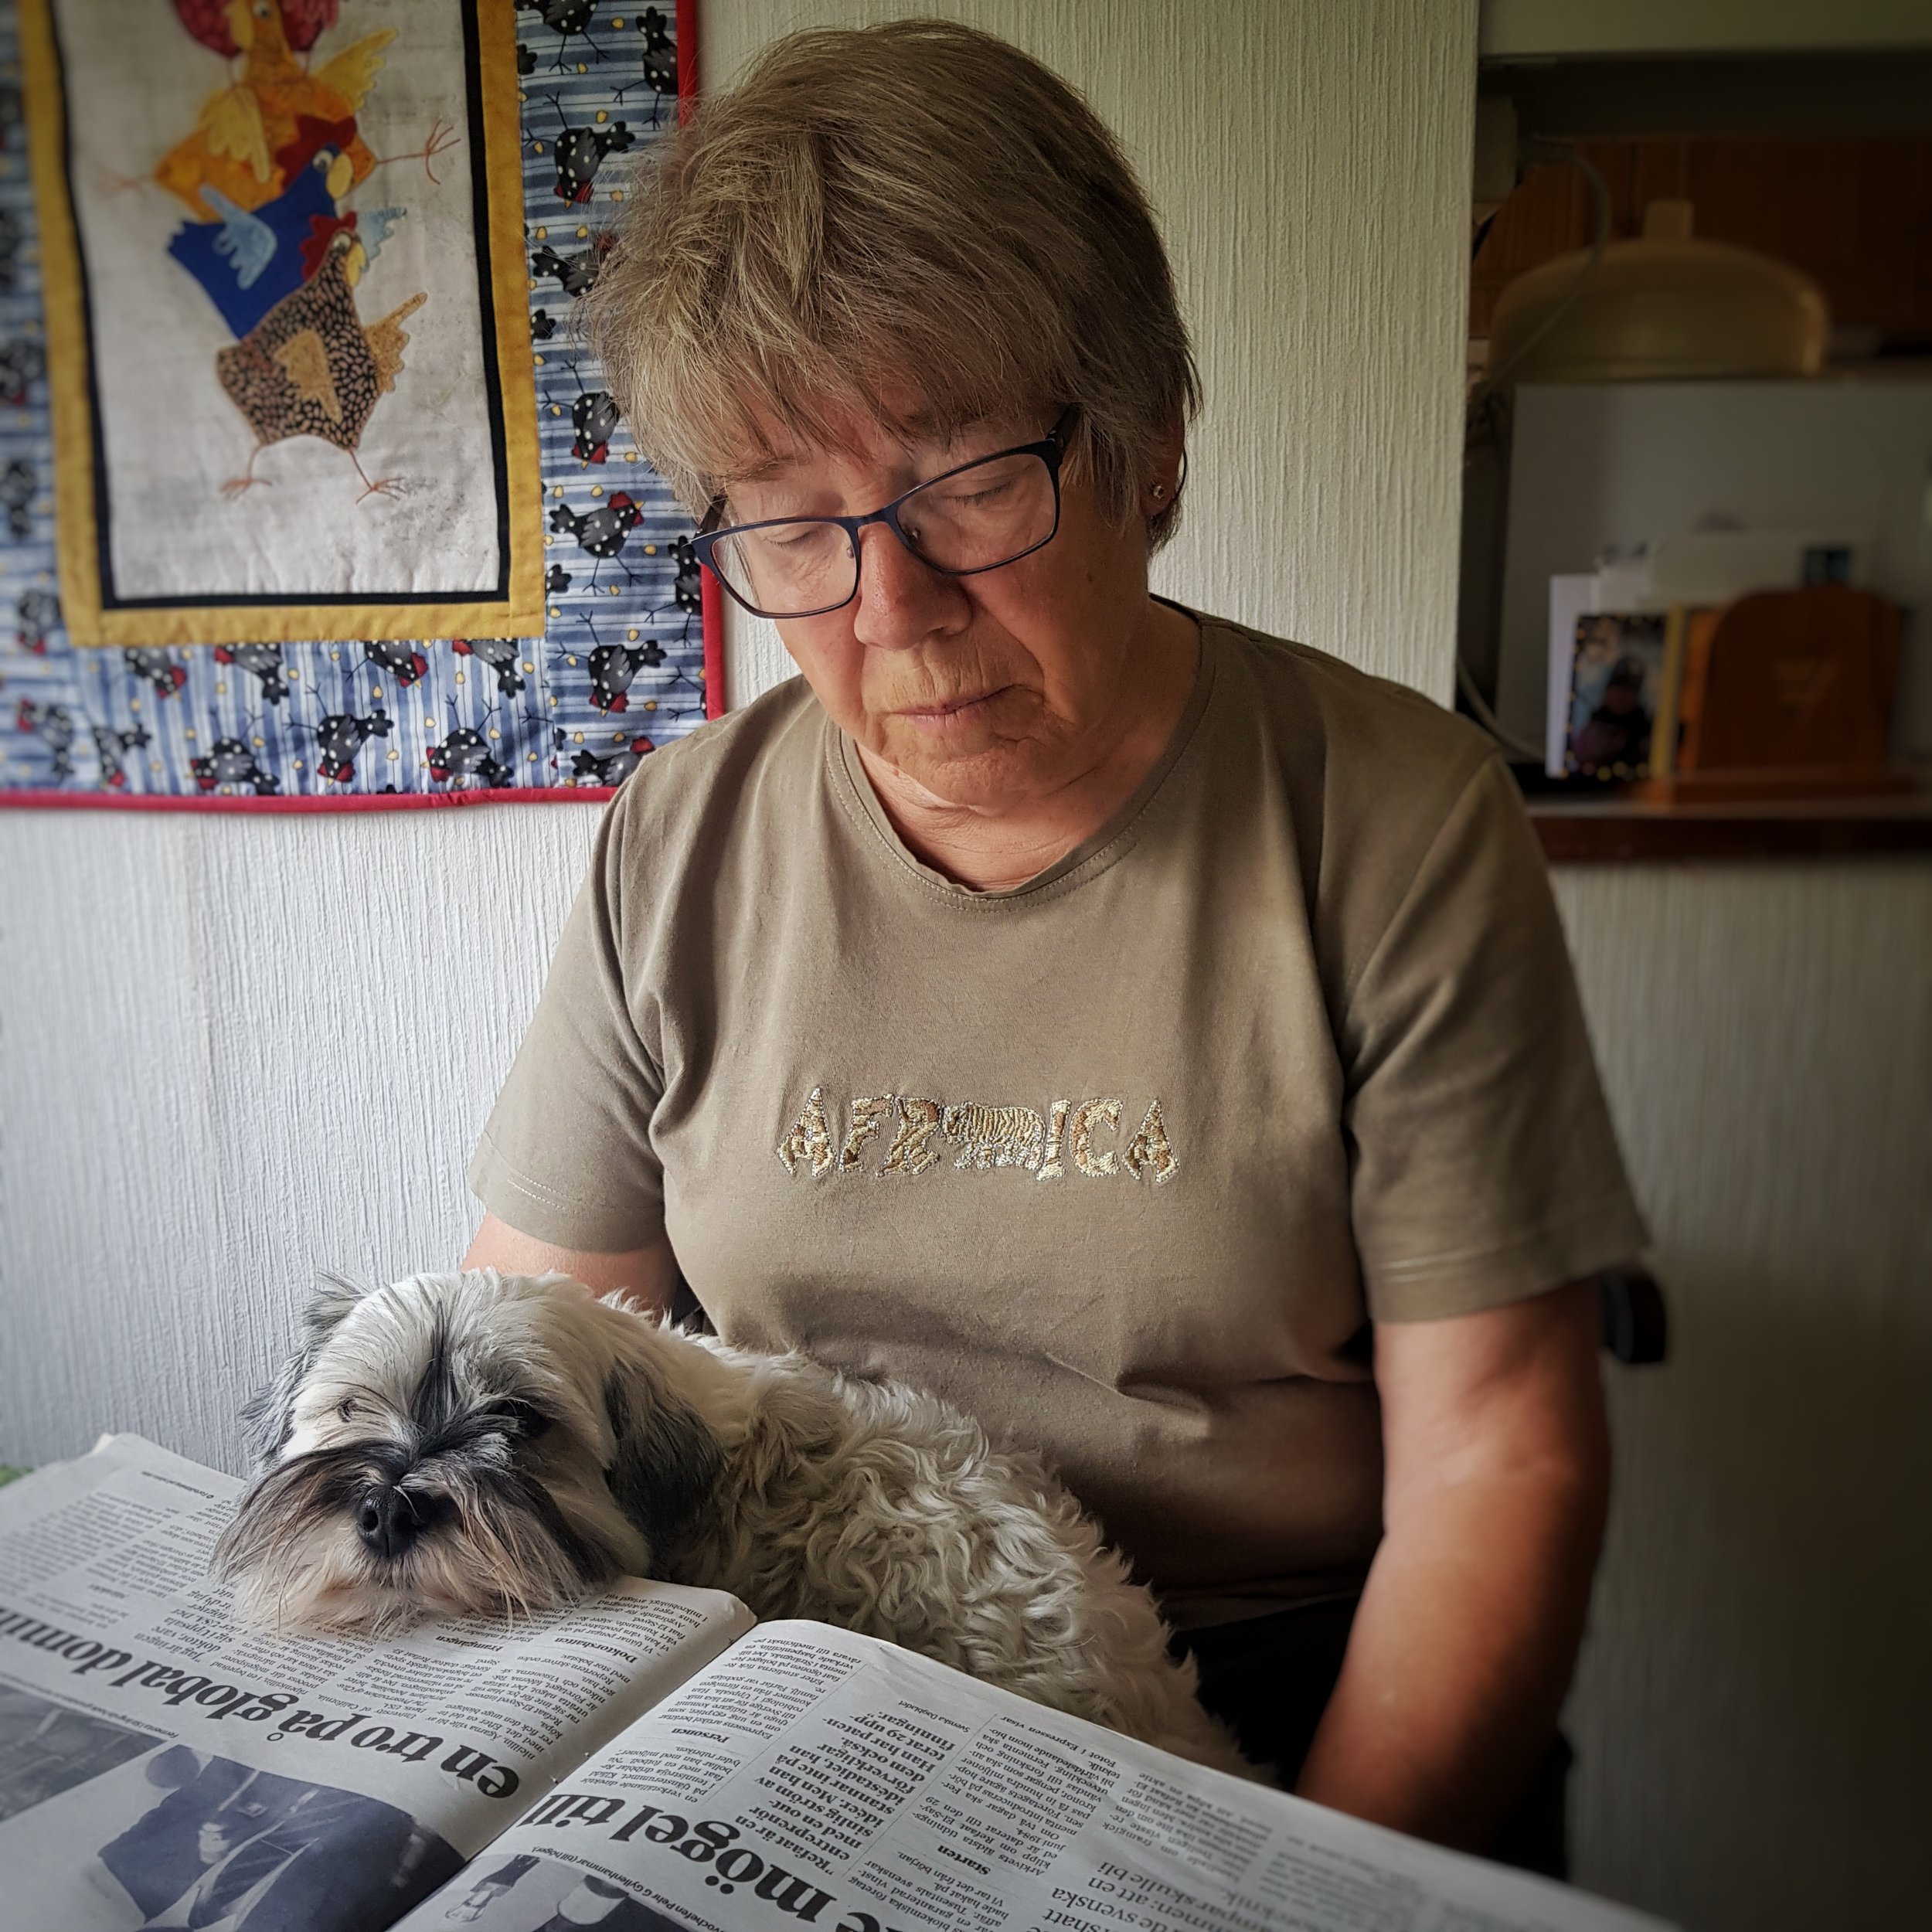 Day 200 - July 19: Gramma, please read me the news!